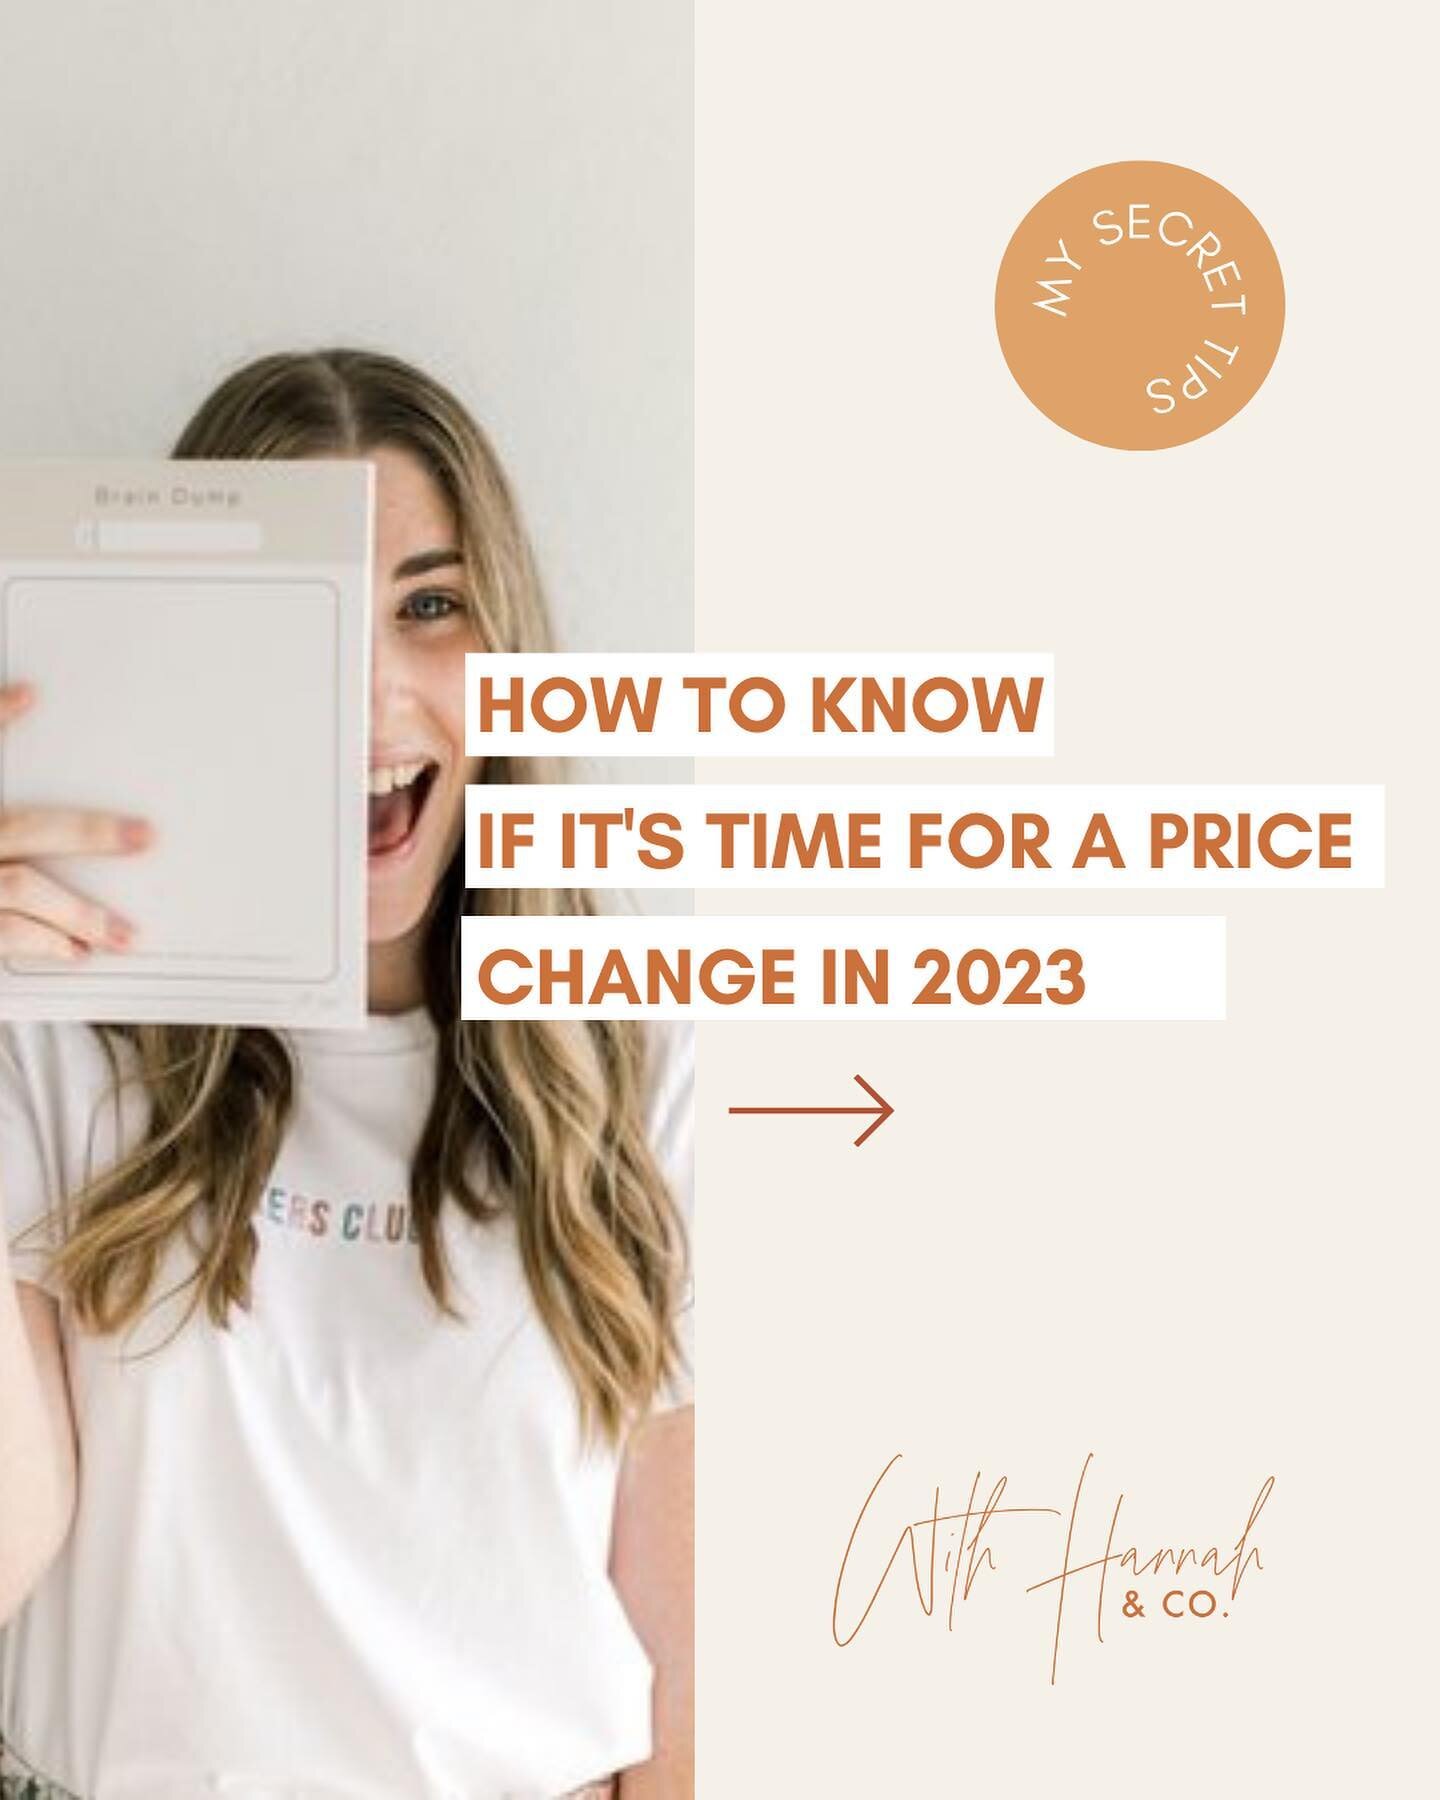 Considering a price change for 2023? And yes that means increasing or decreasing! 

3 ways to know you&rsquo;re ready for a price change:
1. Demand - don&rsquo;t increase prices just because you think that will mean more money for you. Demand is one 